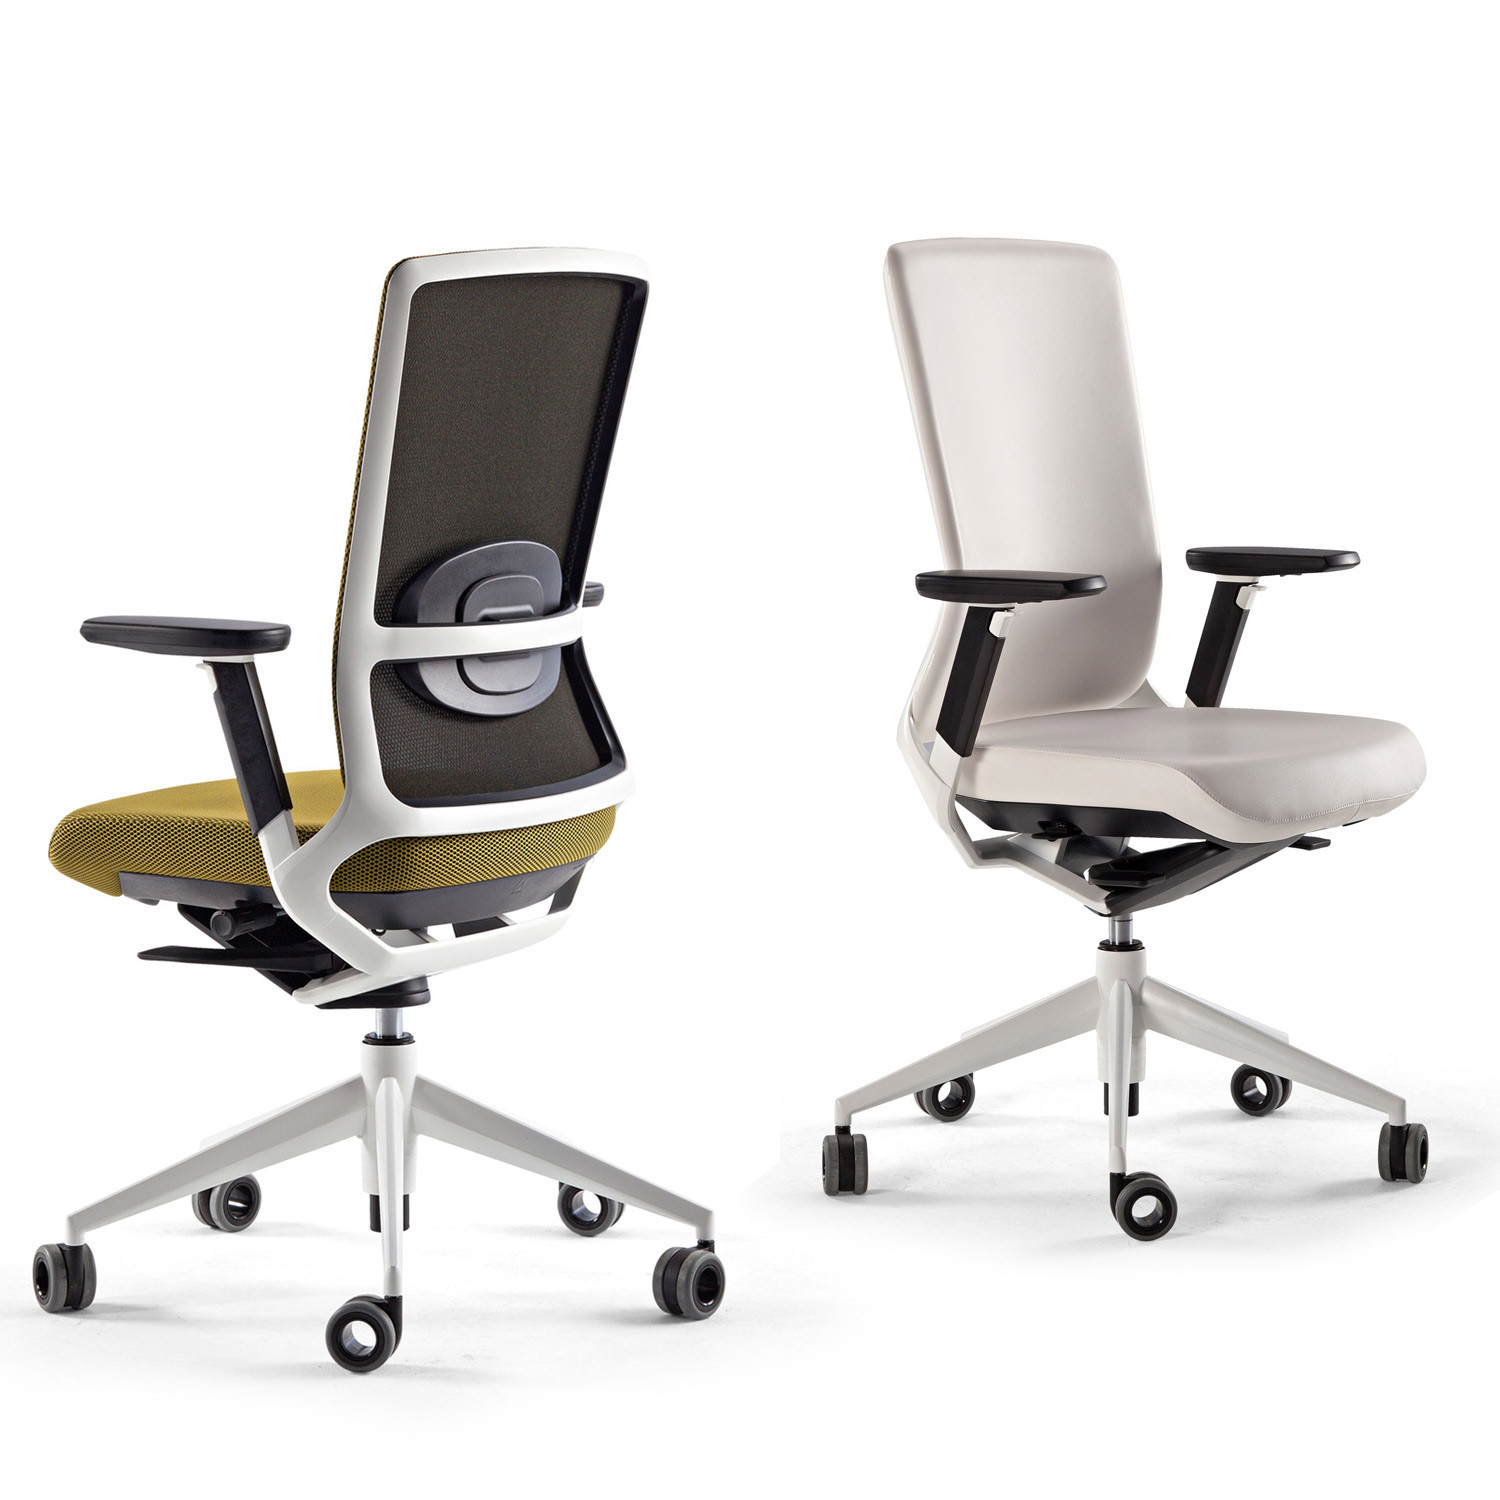 TNK 500 Office Chairs